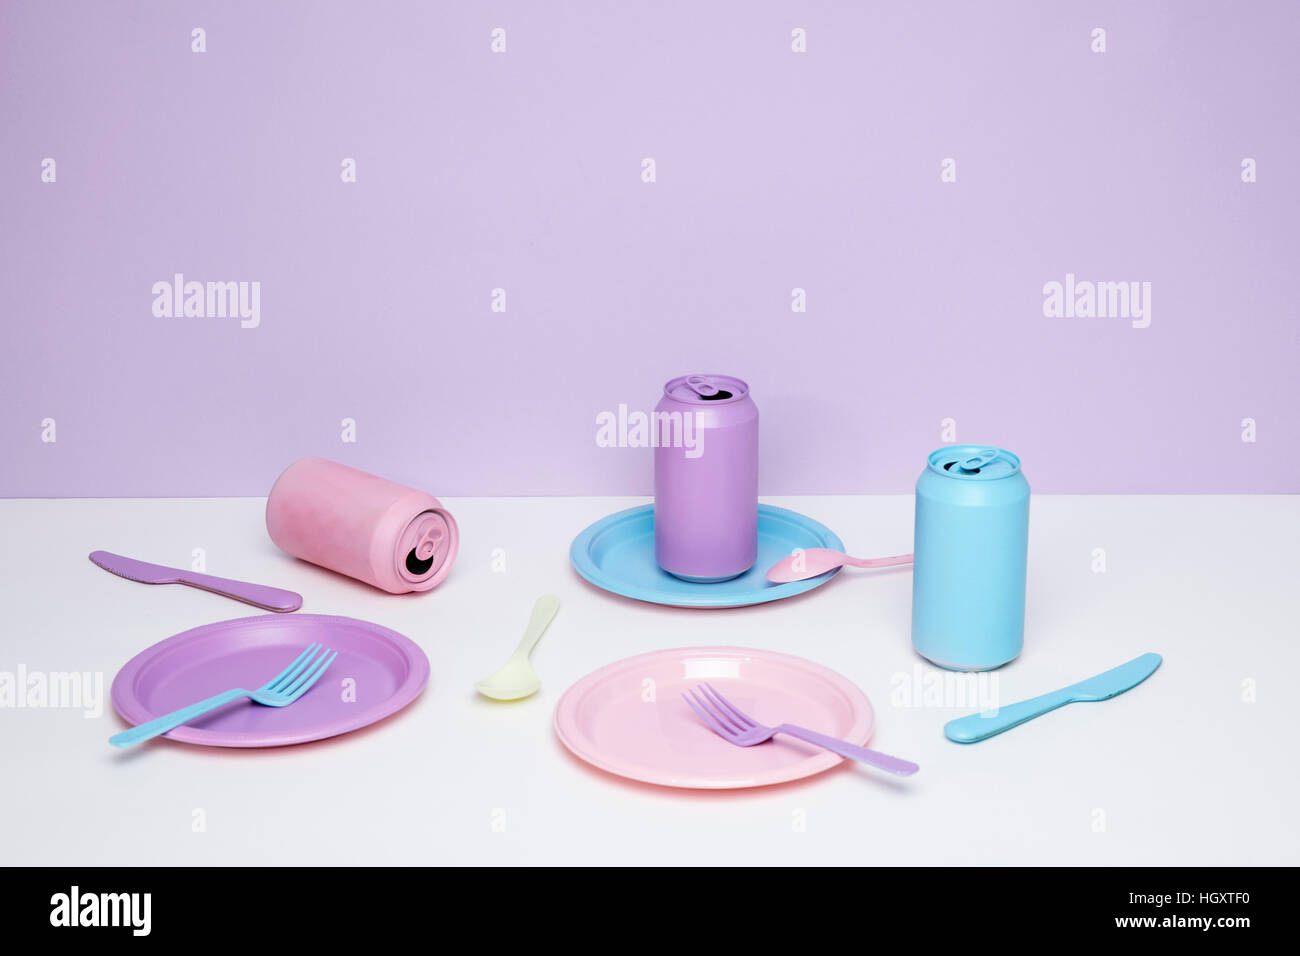 Pastel colored plates, cans, forks and knives Stock Photo